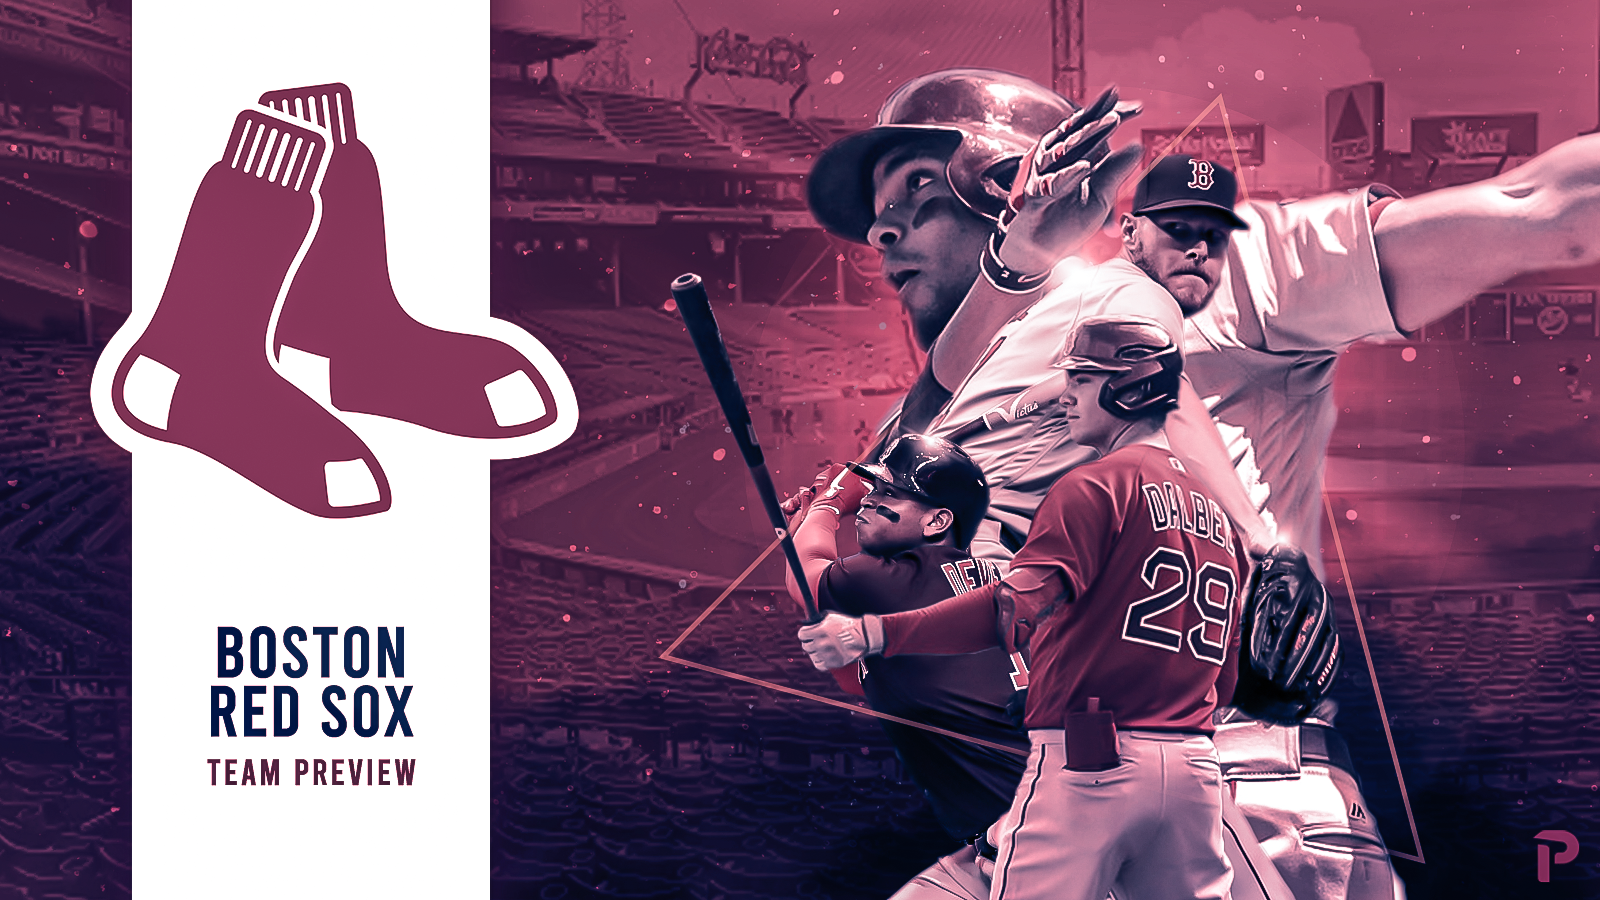 Boston strong!!  Boston red sox wallpaper, Red sox wallpaper, Red